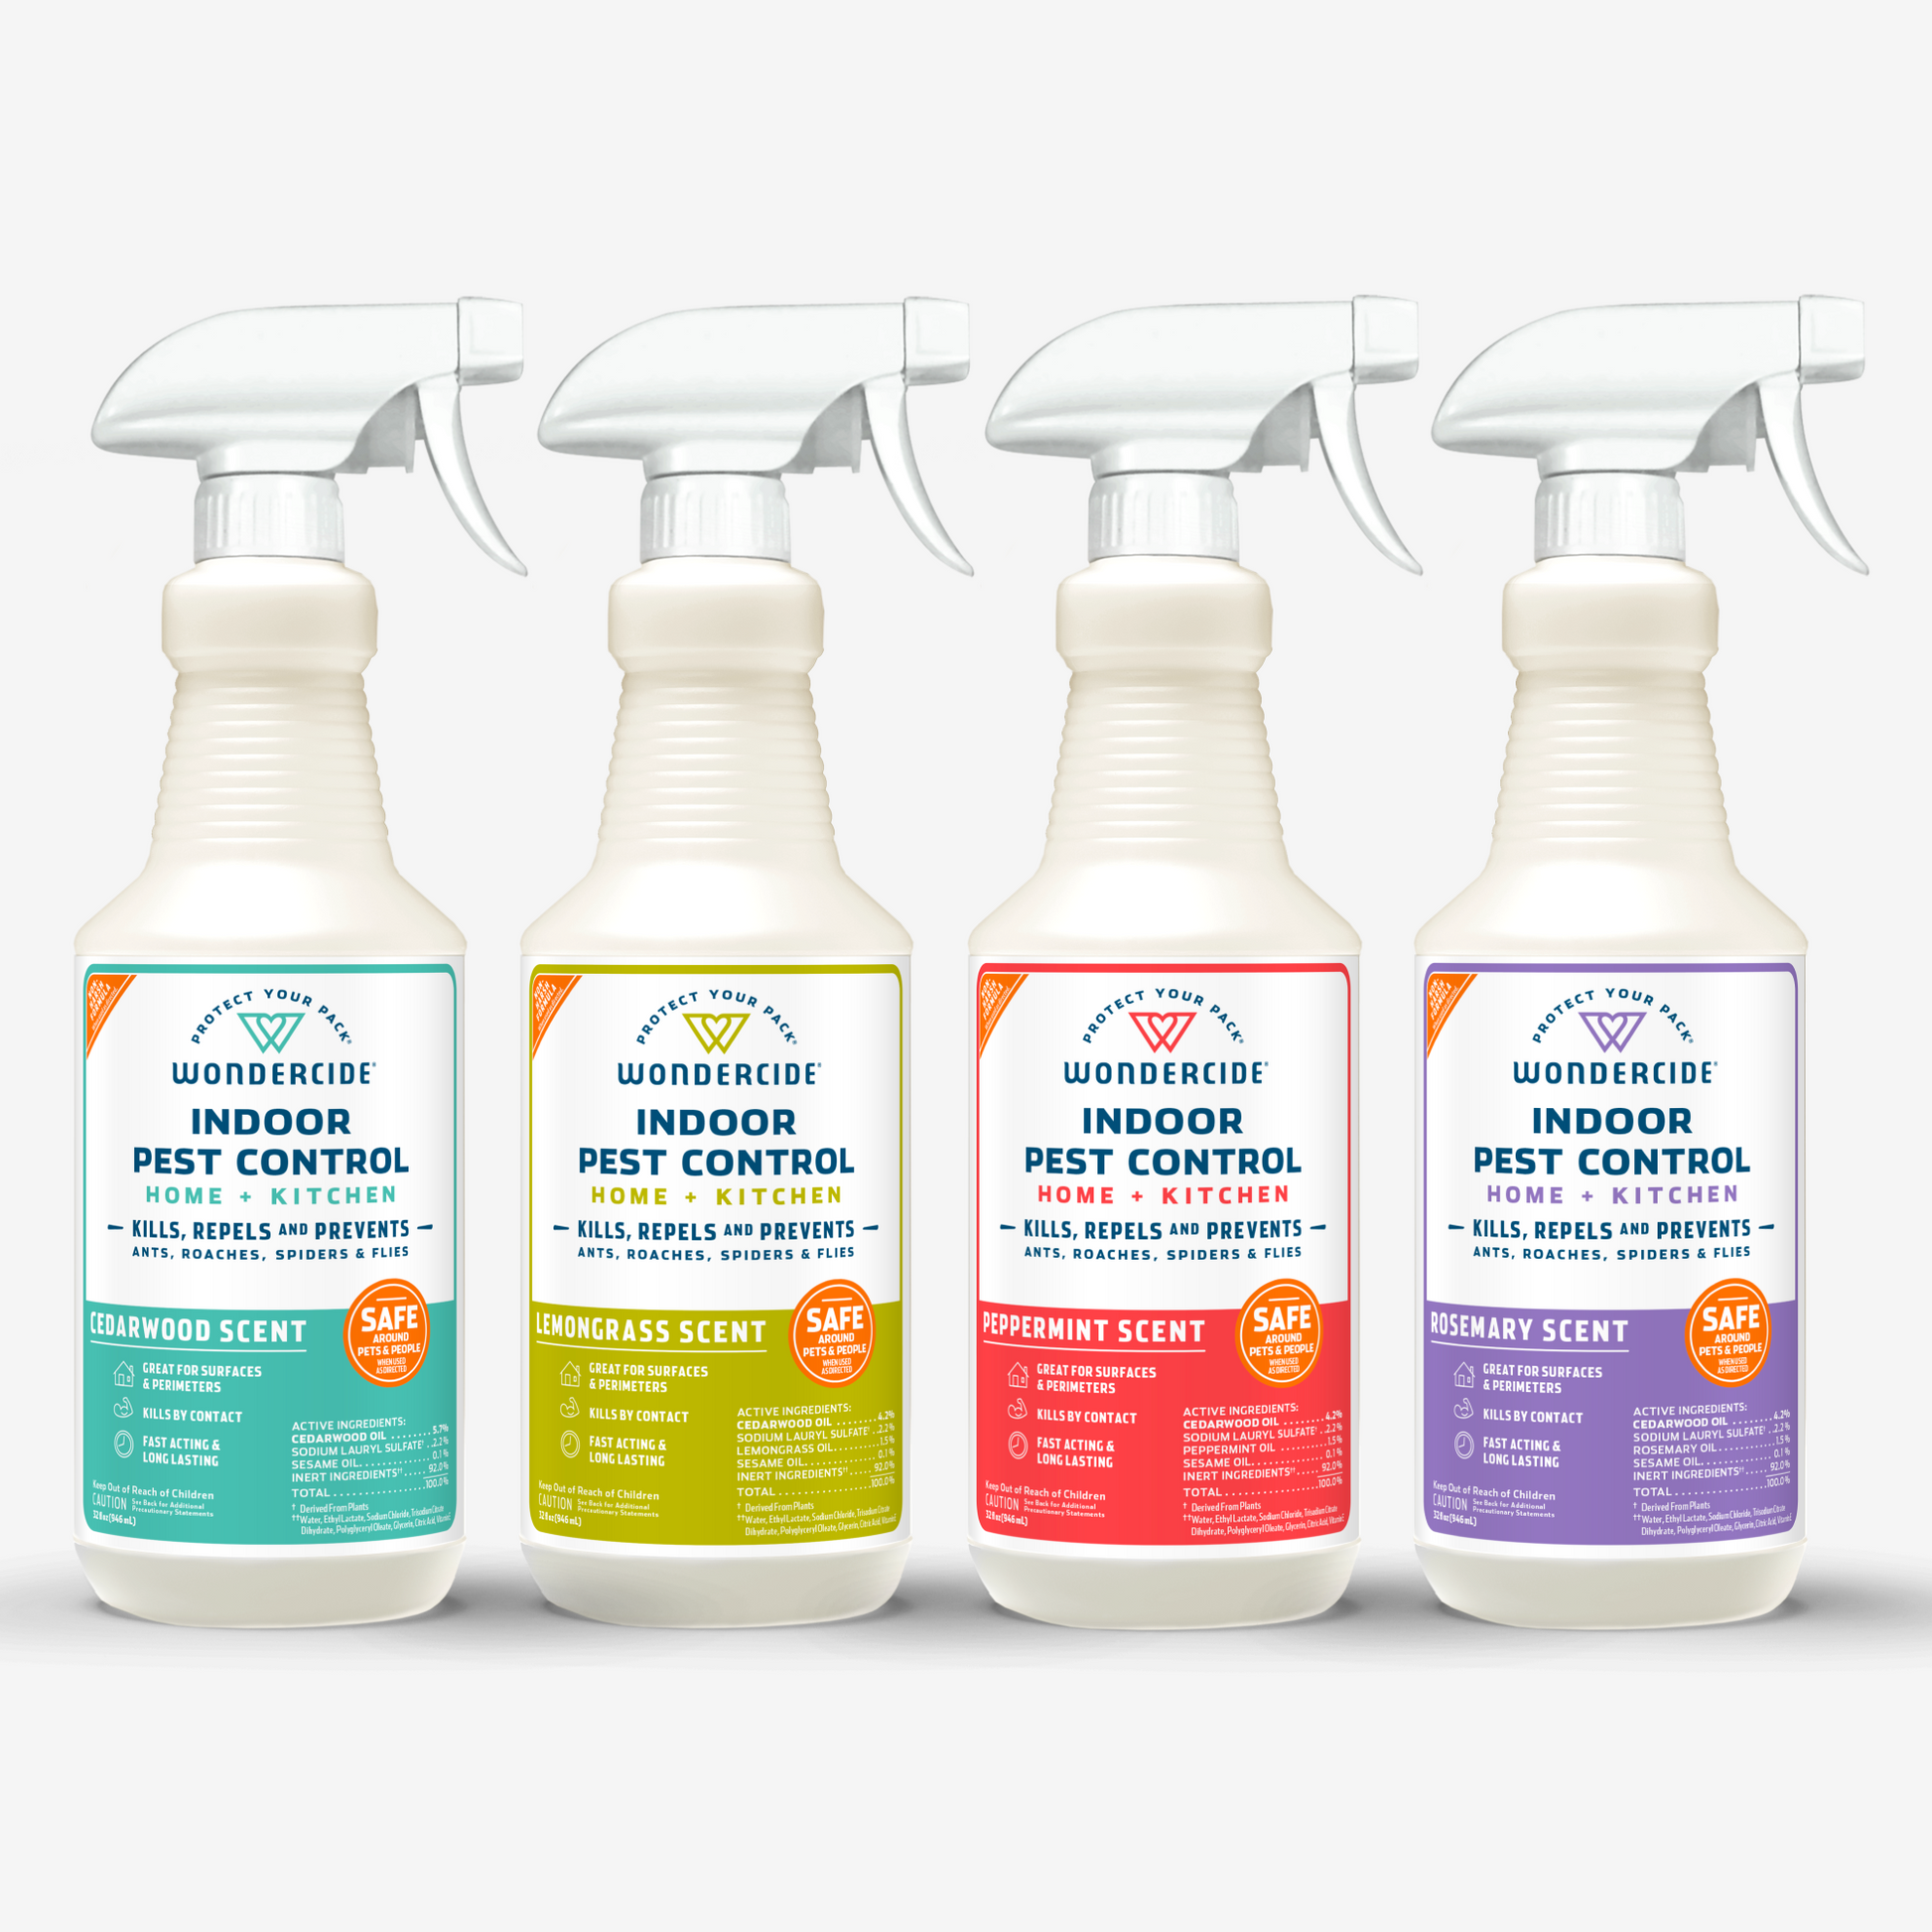 Fruit Fly Spray Concentrate - Chemical Insect Control